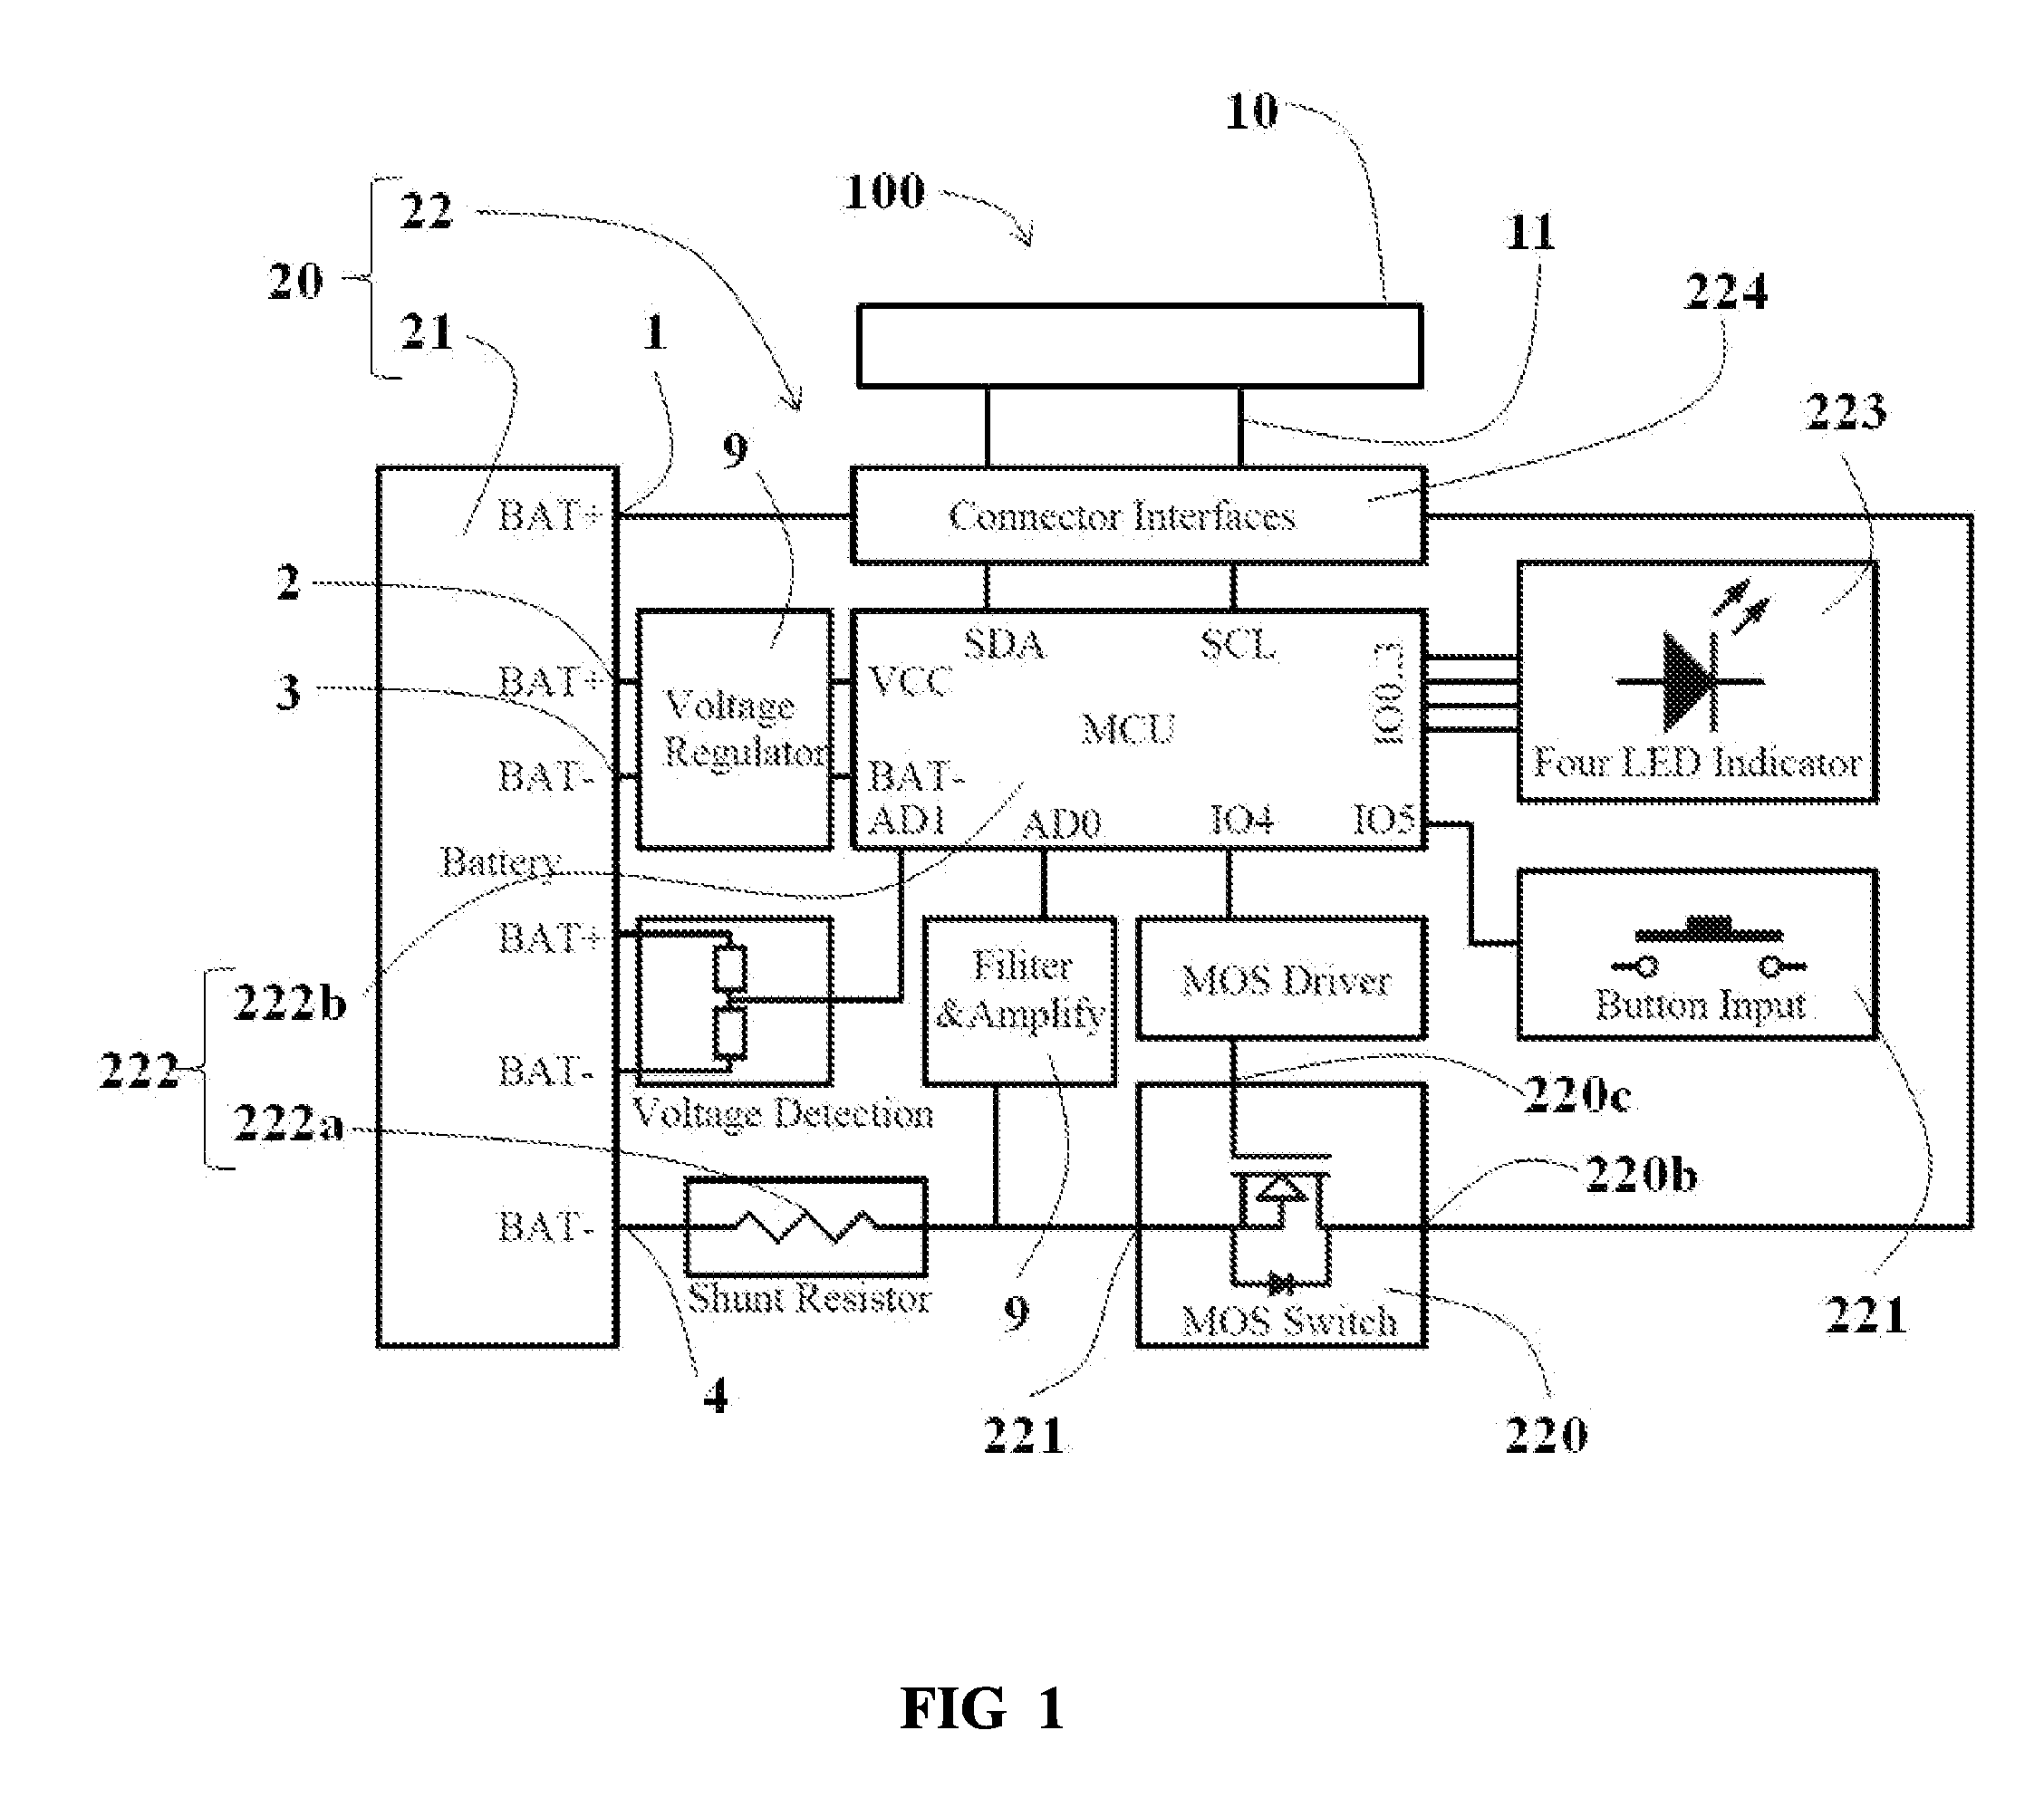 Battery and unmanned aerial vehicle with the battery